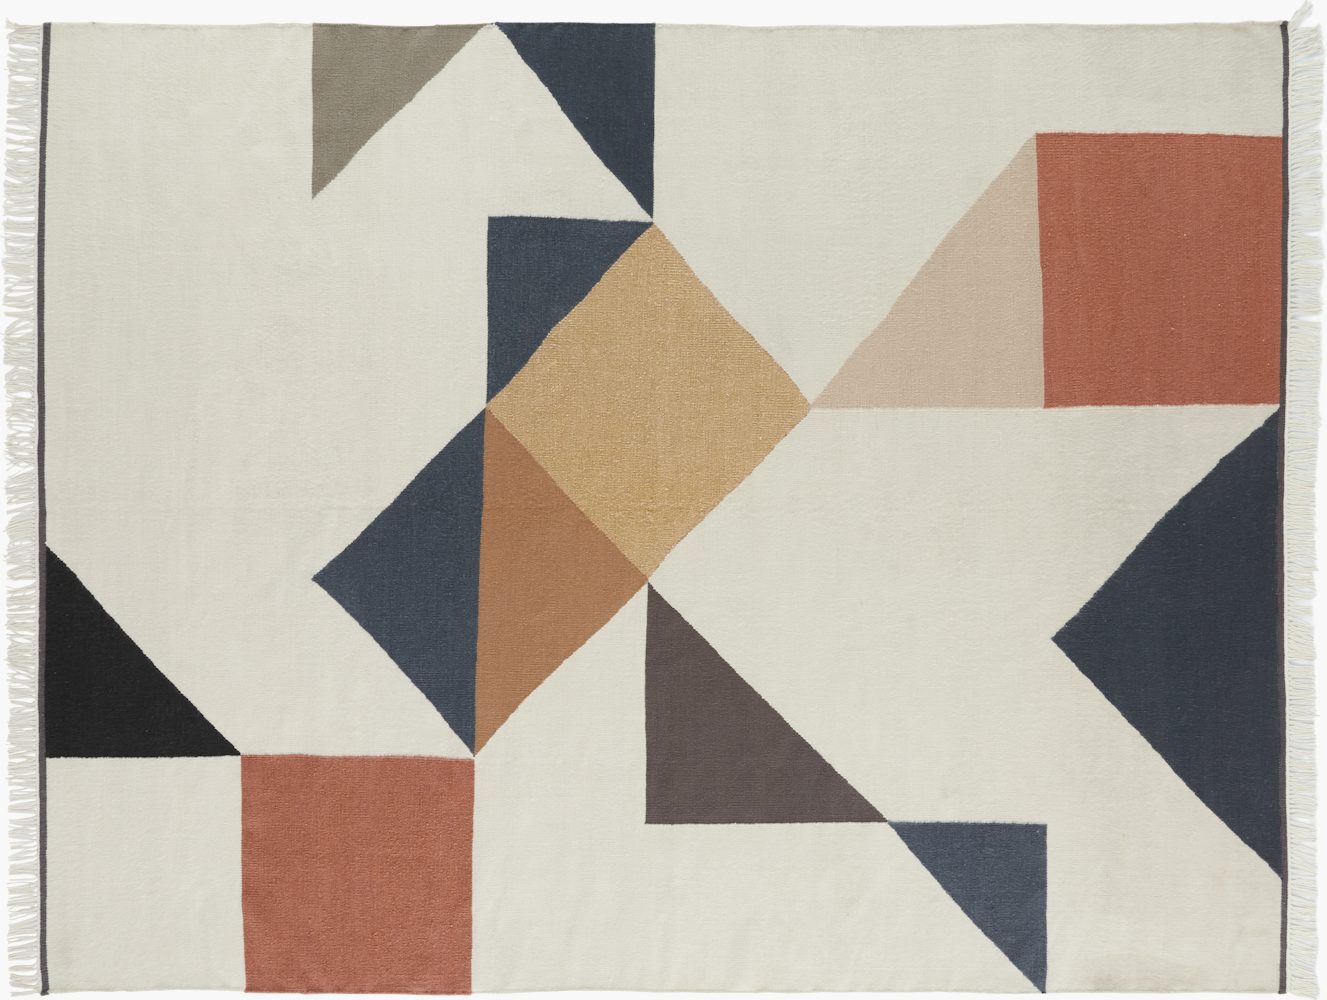 Memo Rug Canyon Design Within Reach, 8×10 Rugs Under $200